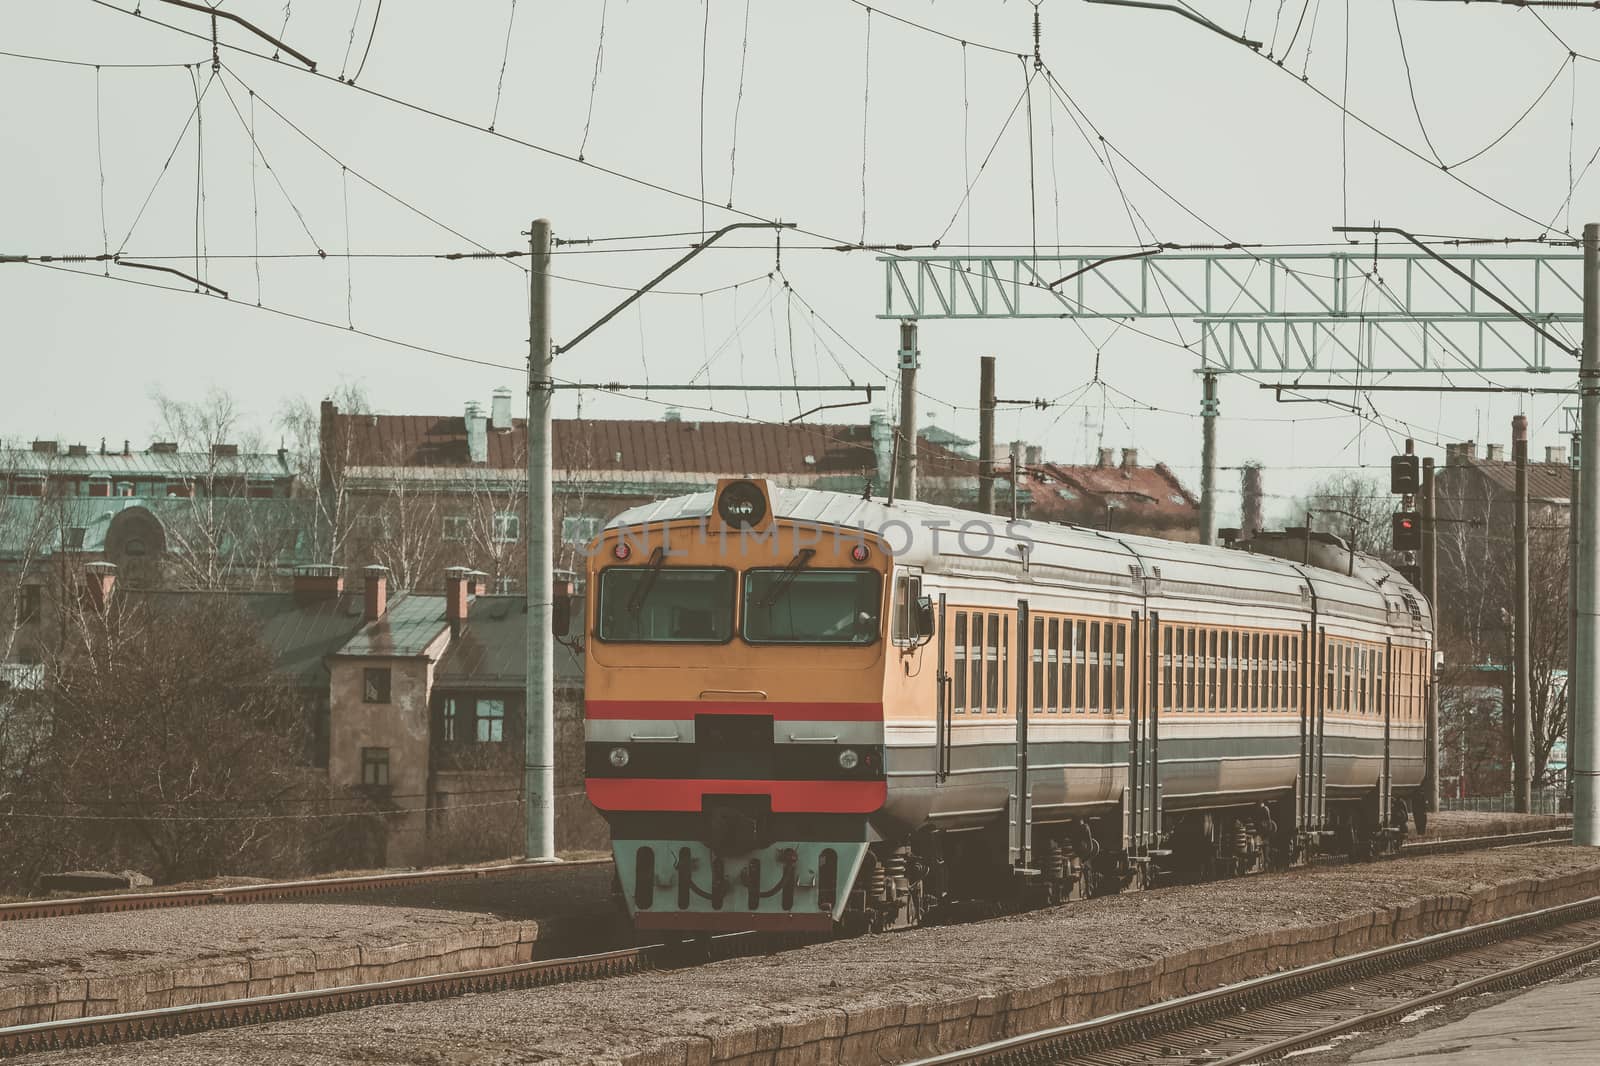 Old yellow passenger diesel train moving at the terminal